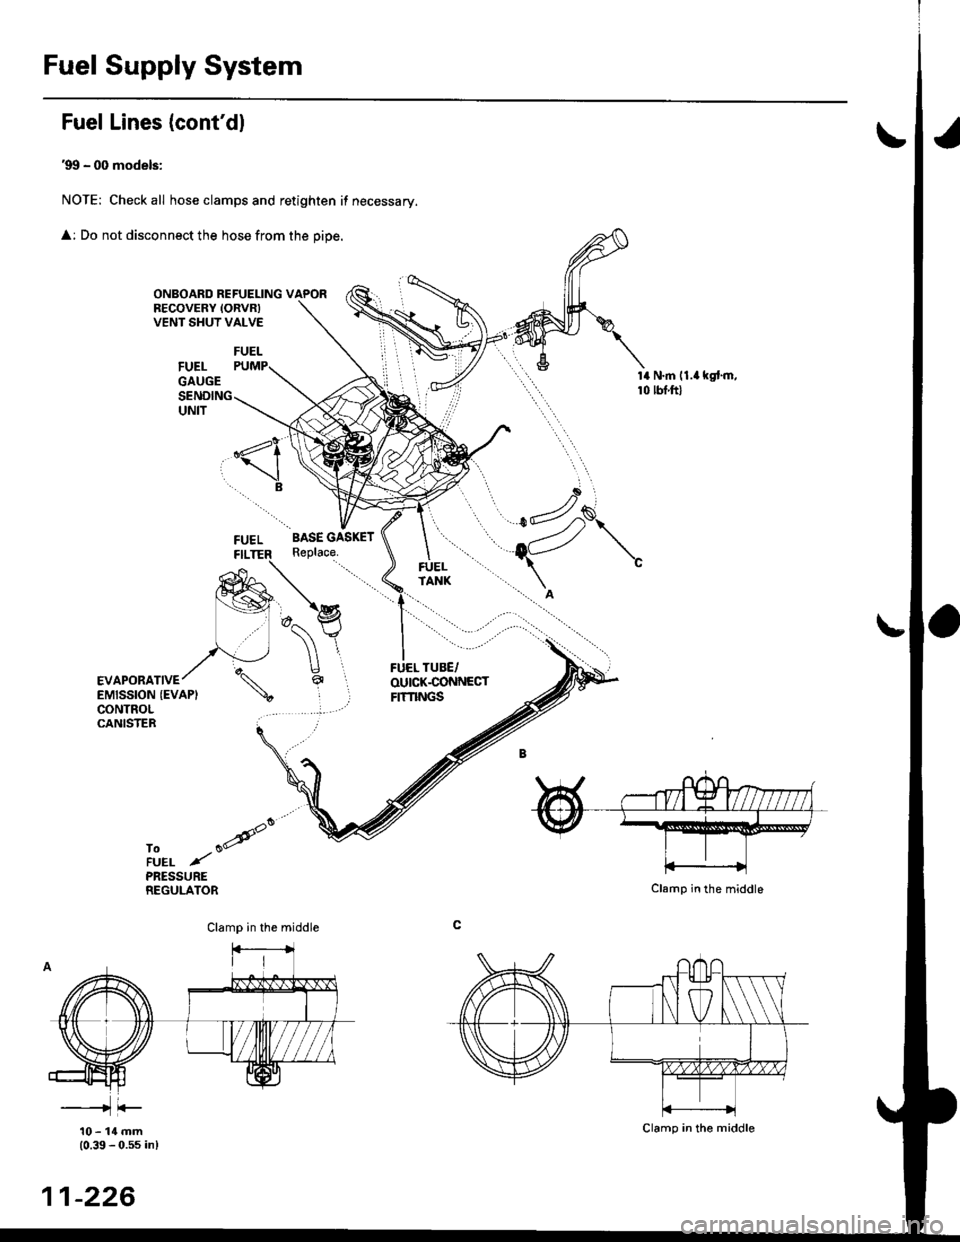 HONDA CIVIC 1996 6.G Service Manual Fuel Supply System
Fuel Lines (contdl
.99 - 00 models:
NOTE: Check all hose clamps and retighten if necessary.
 : Do not disconnect the hose from the pipe.
ONBOARD REFUELING VAPORBECOVERY IORVRIVENT 